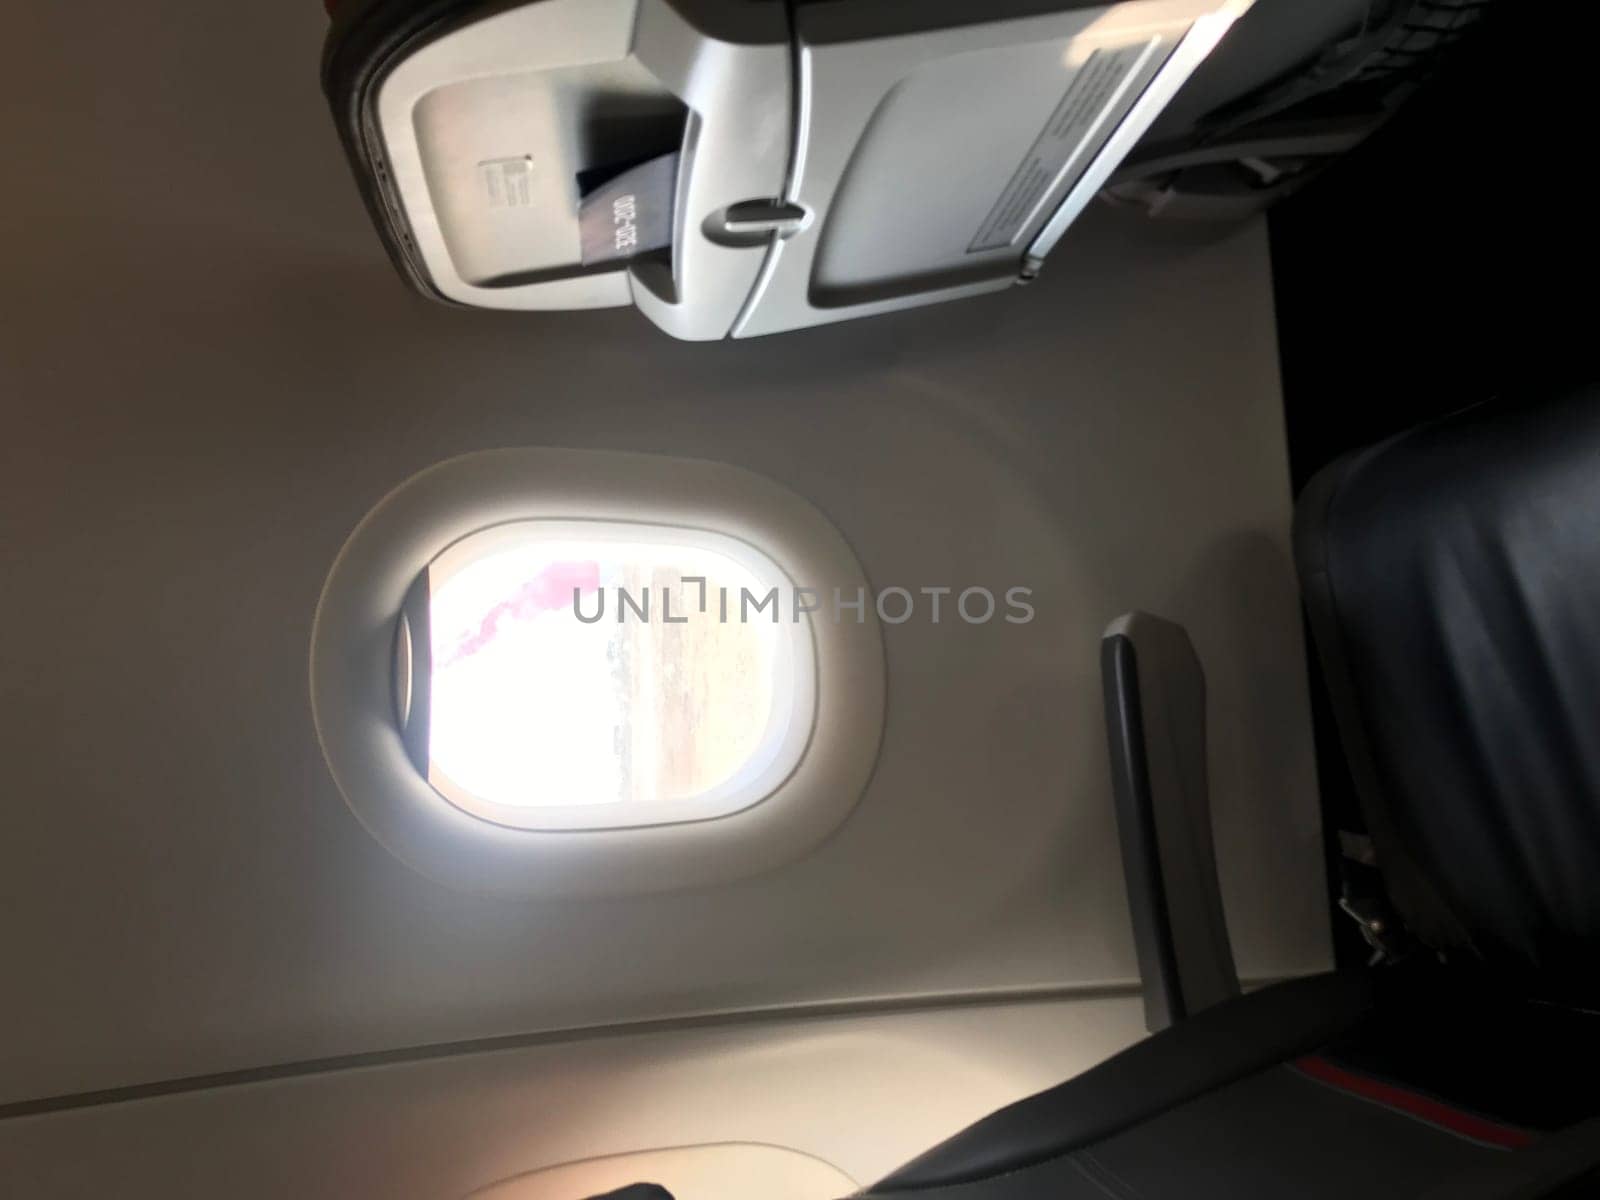 Soothing glimpse of sunlight through an airplane window, evoking the comfort of travel